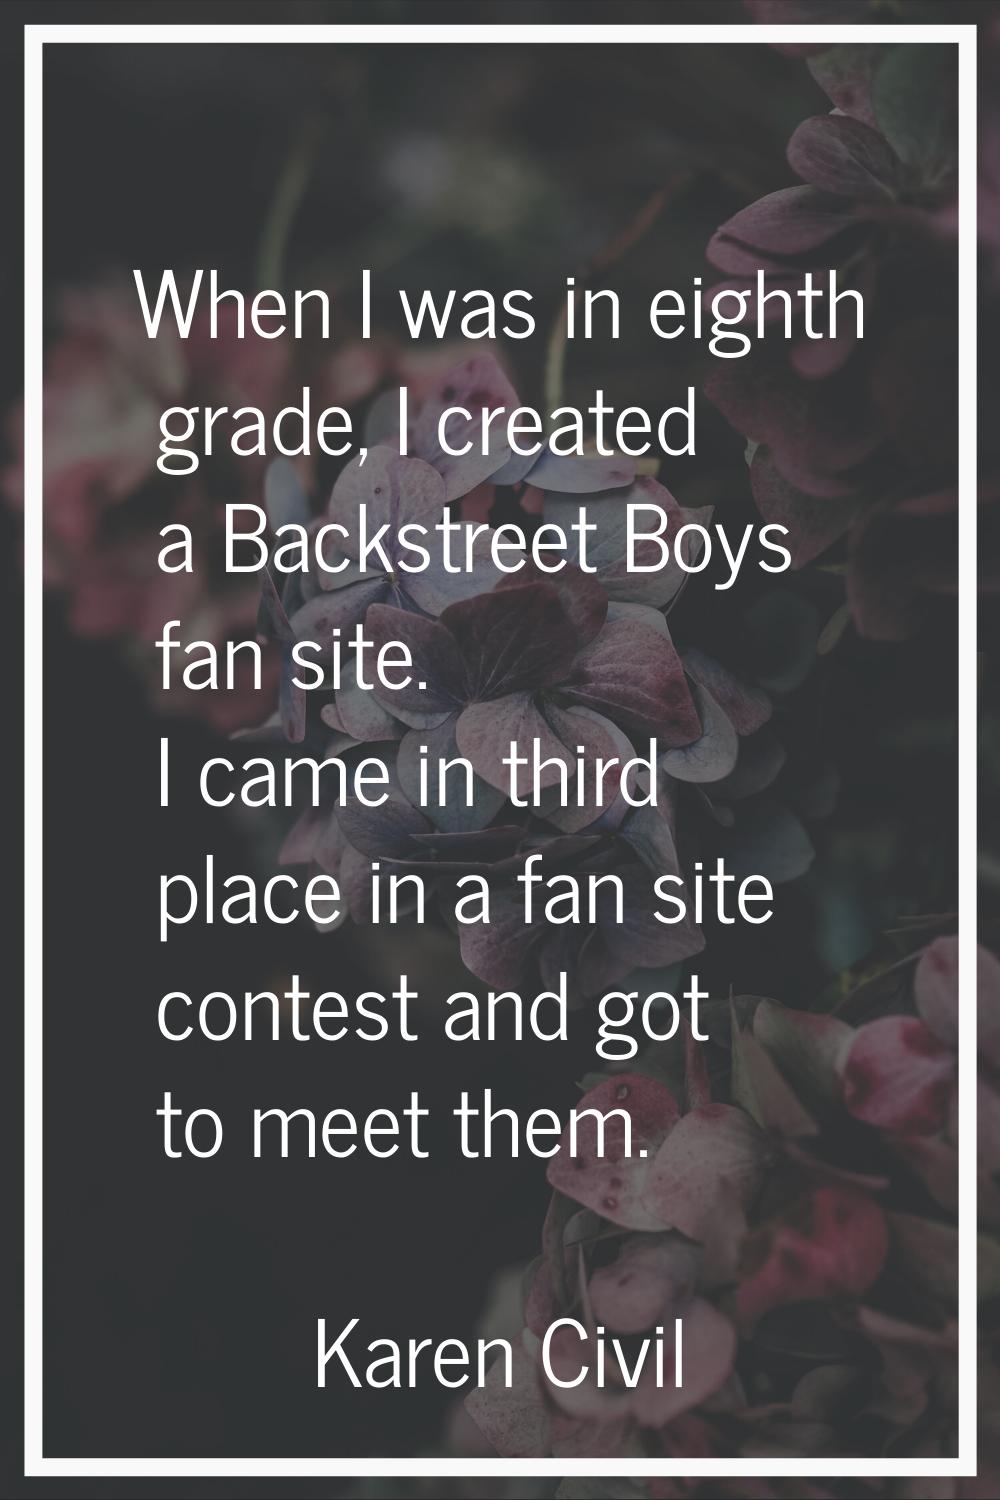 When I was in eighth grade, I created a Backstreet Boys fan site. I came in third place in a fan si